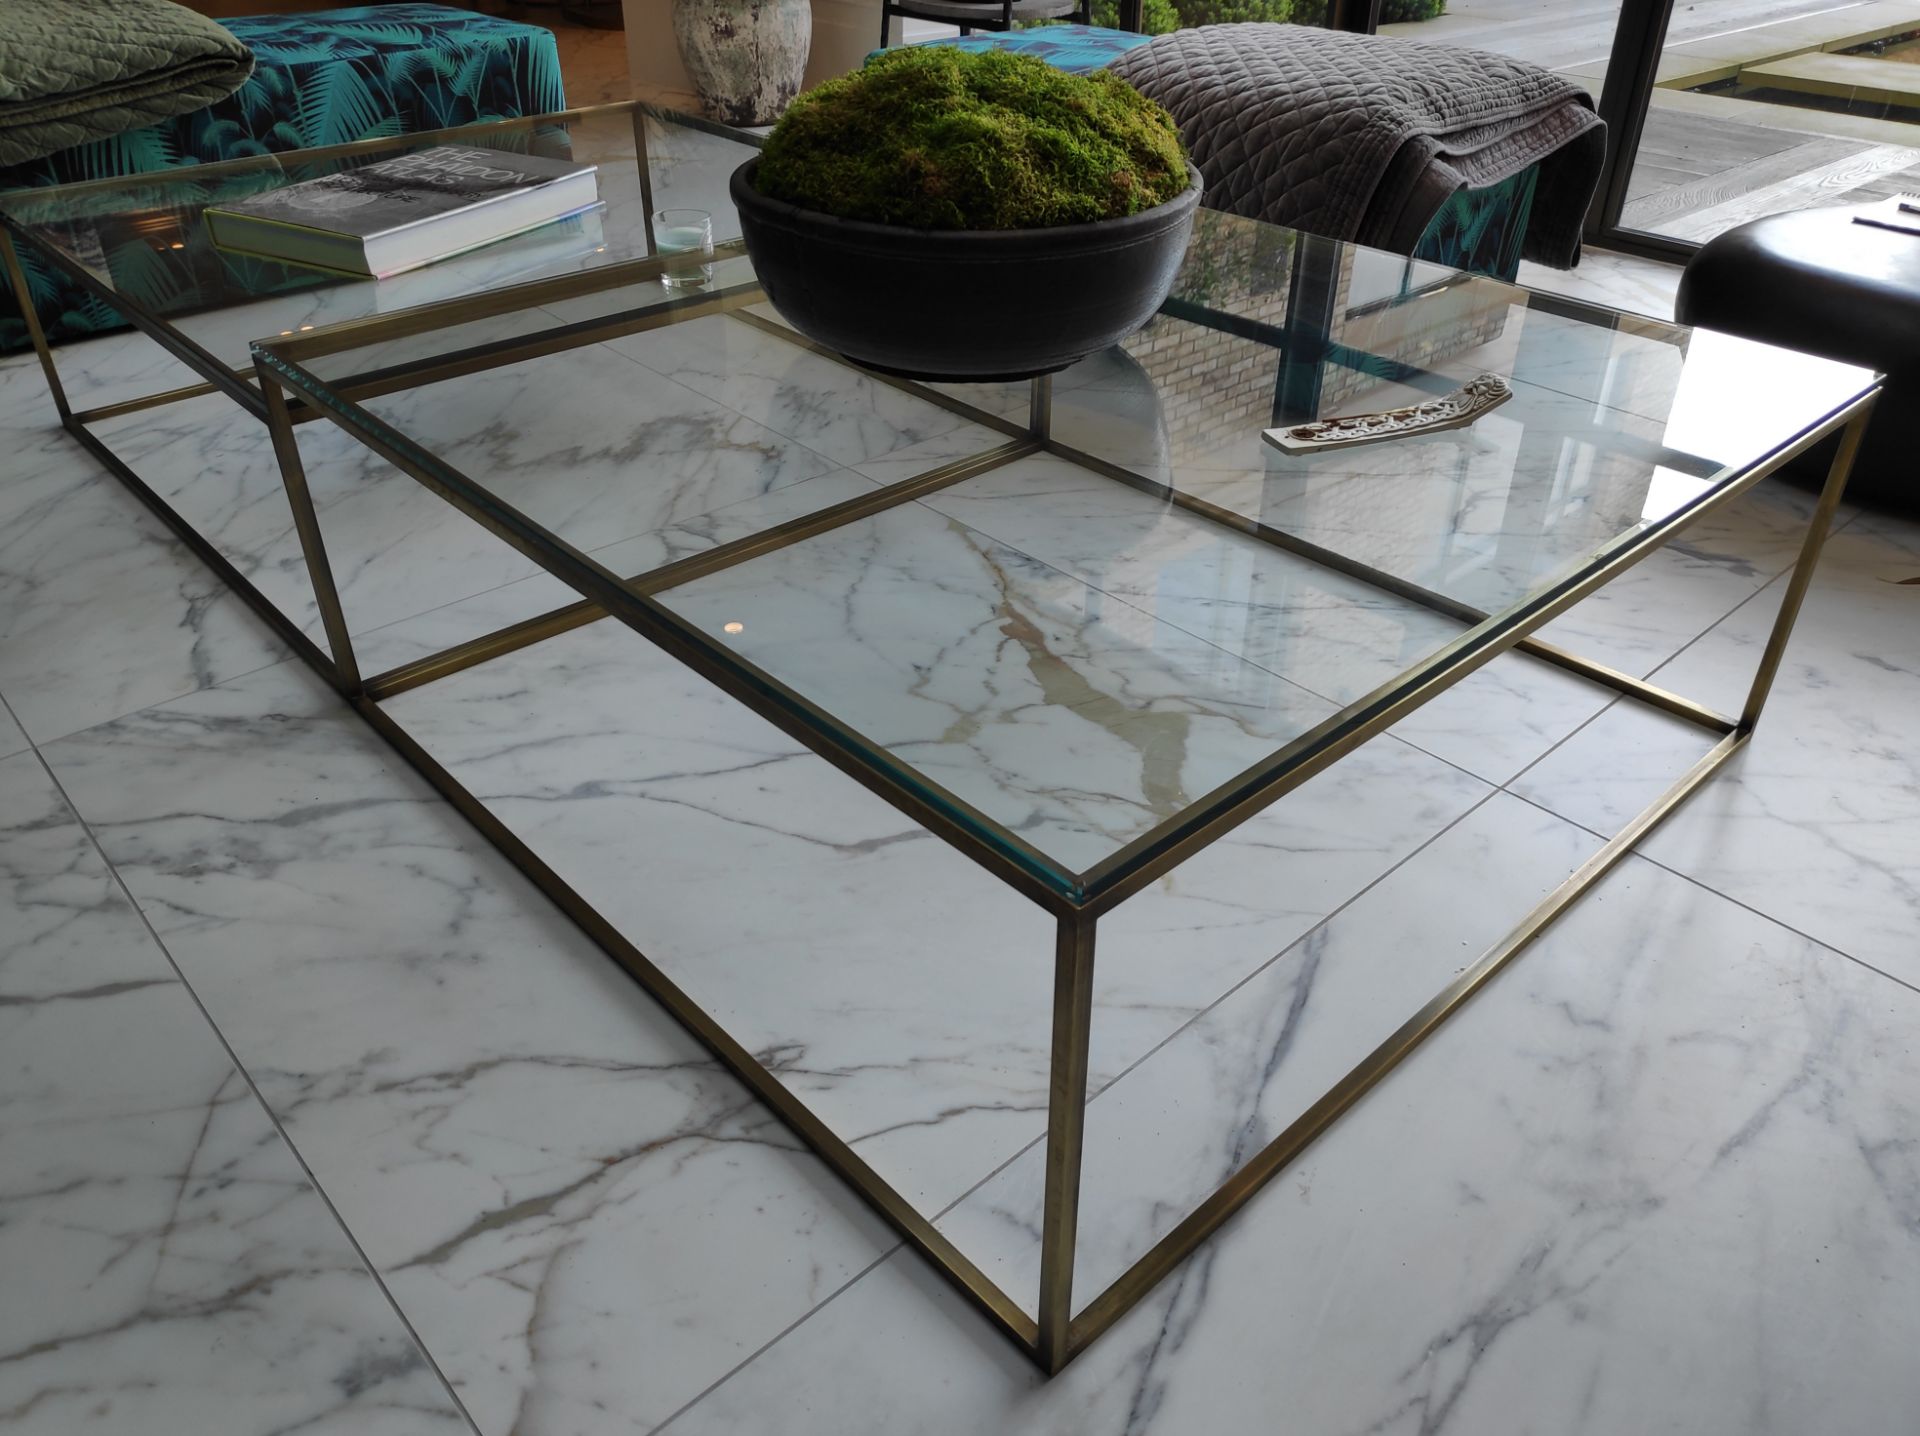 1 x Large 2-Tier Glass Coffee Table with Metal Frame - Dimensions: W240 x D120 x H45.5 cm - - Image 7 of 14